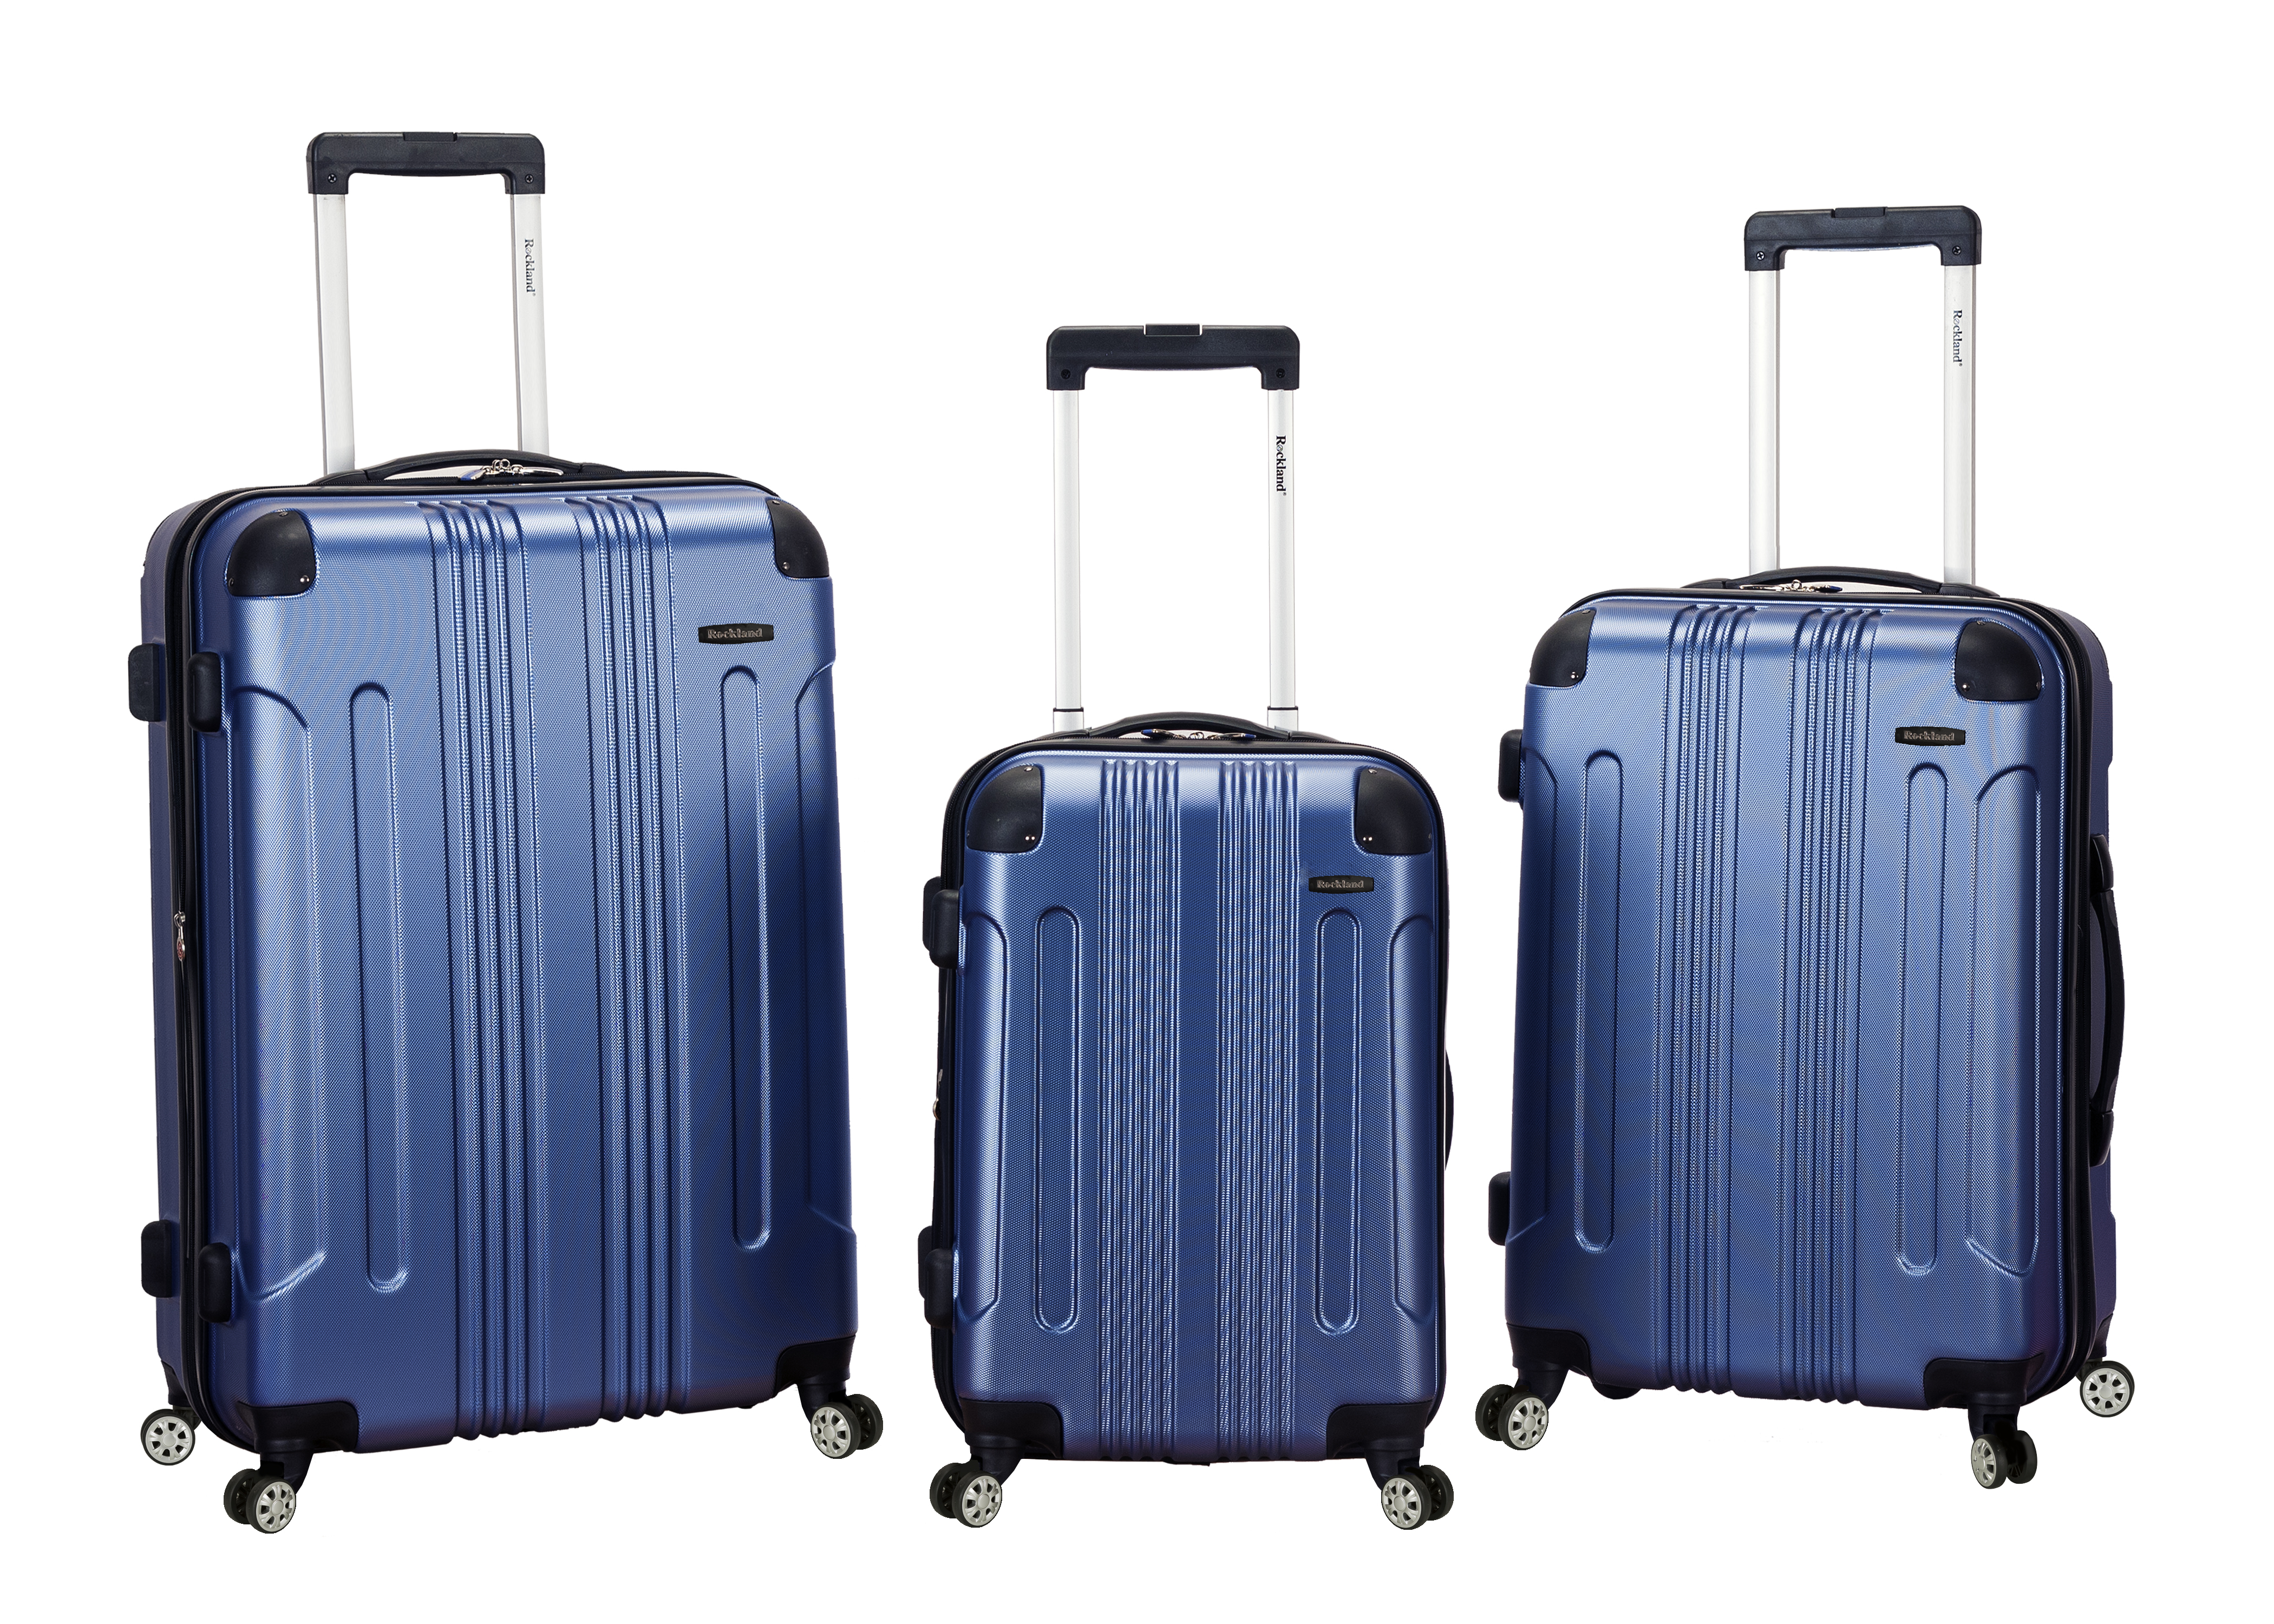 ROCKLAND 3 Pc Sonic Abs Upright Set - Blue